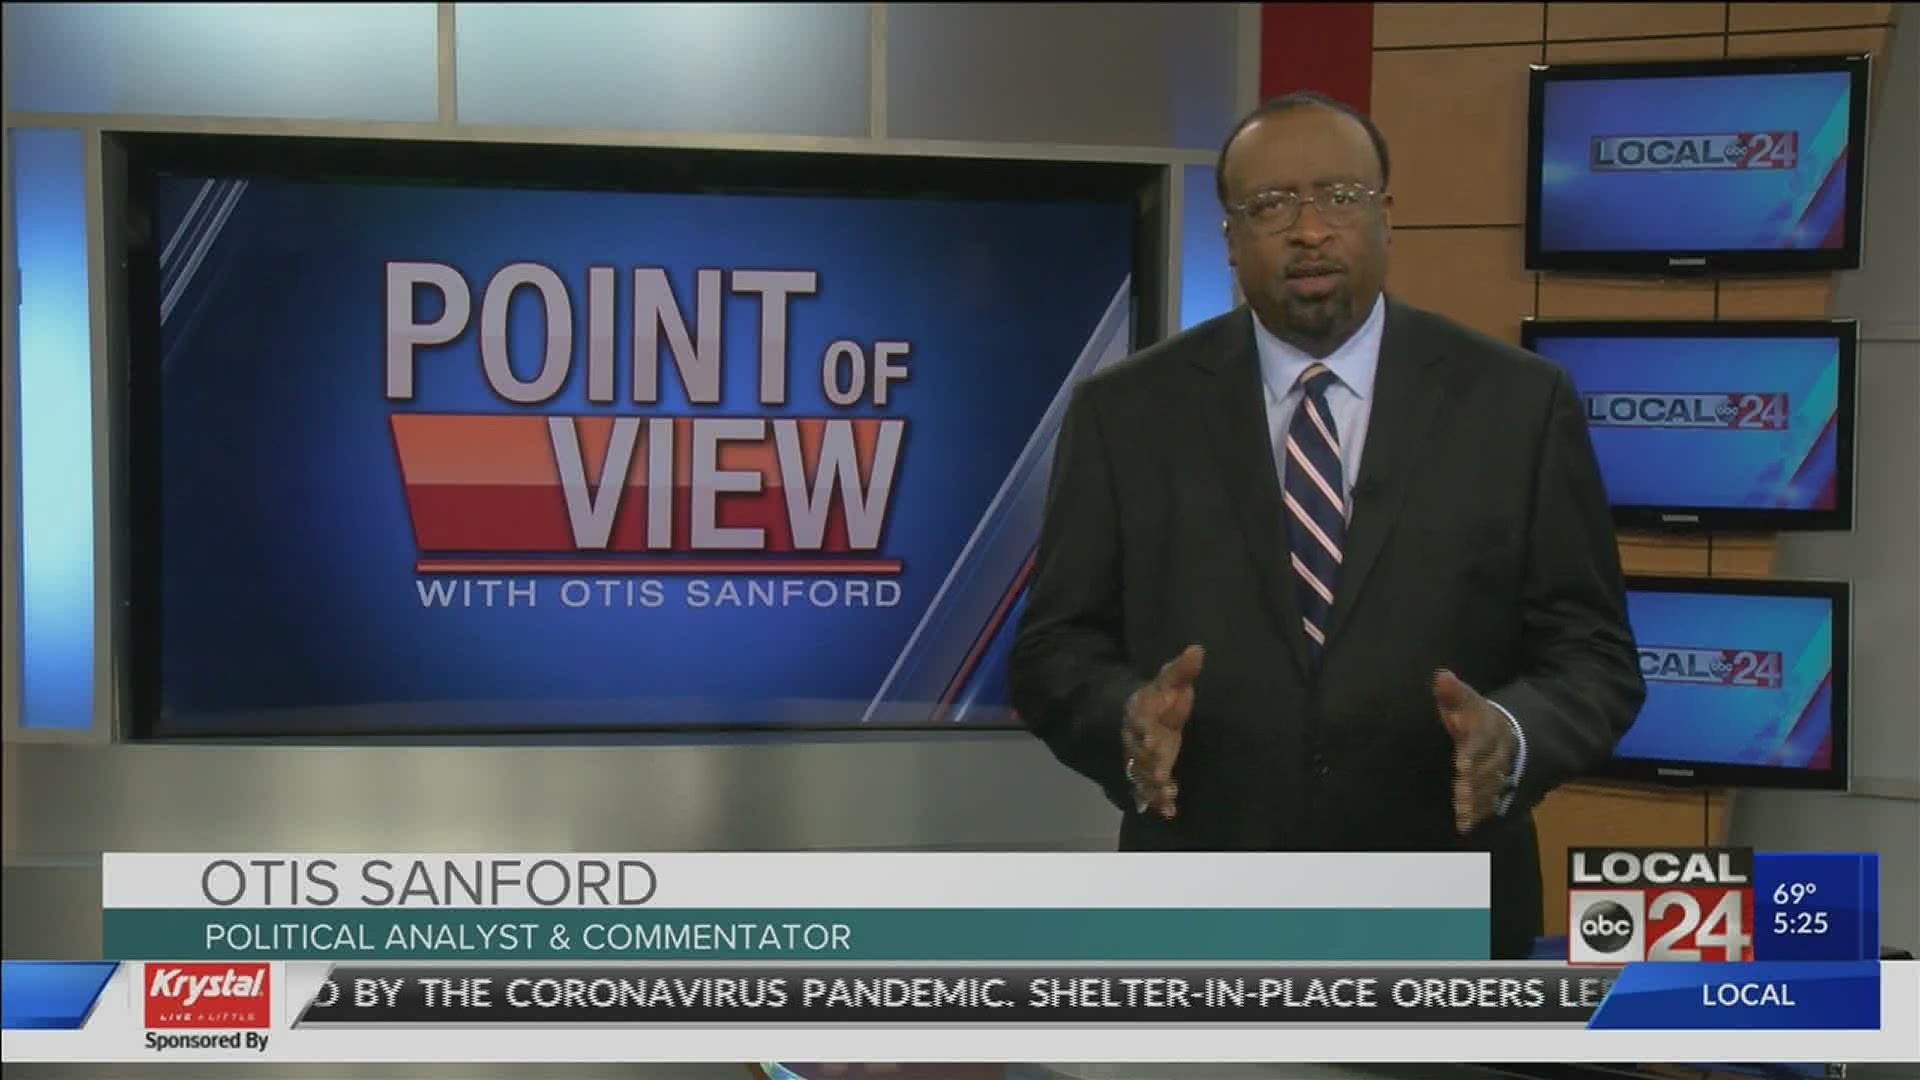 Local 24 News political analyst and commentator Otis Sanford shares his point of view on Memorial Day weekend amid COVID-19.